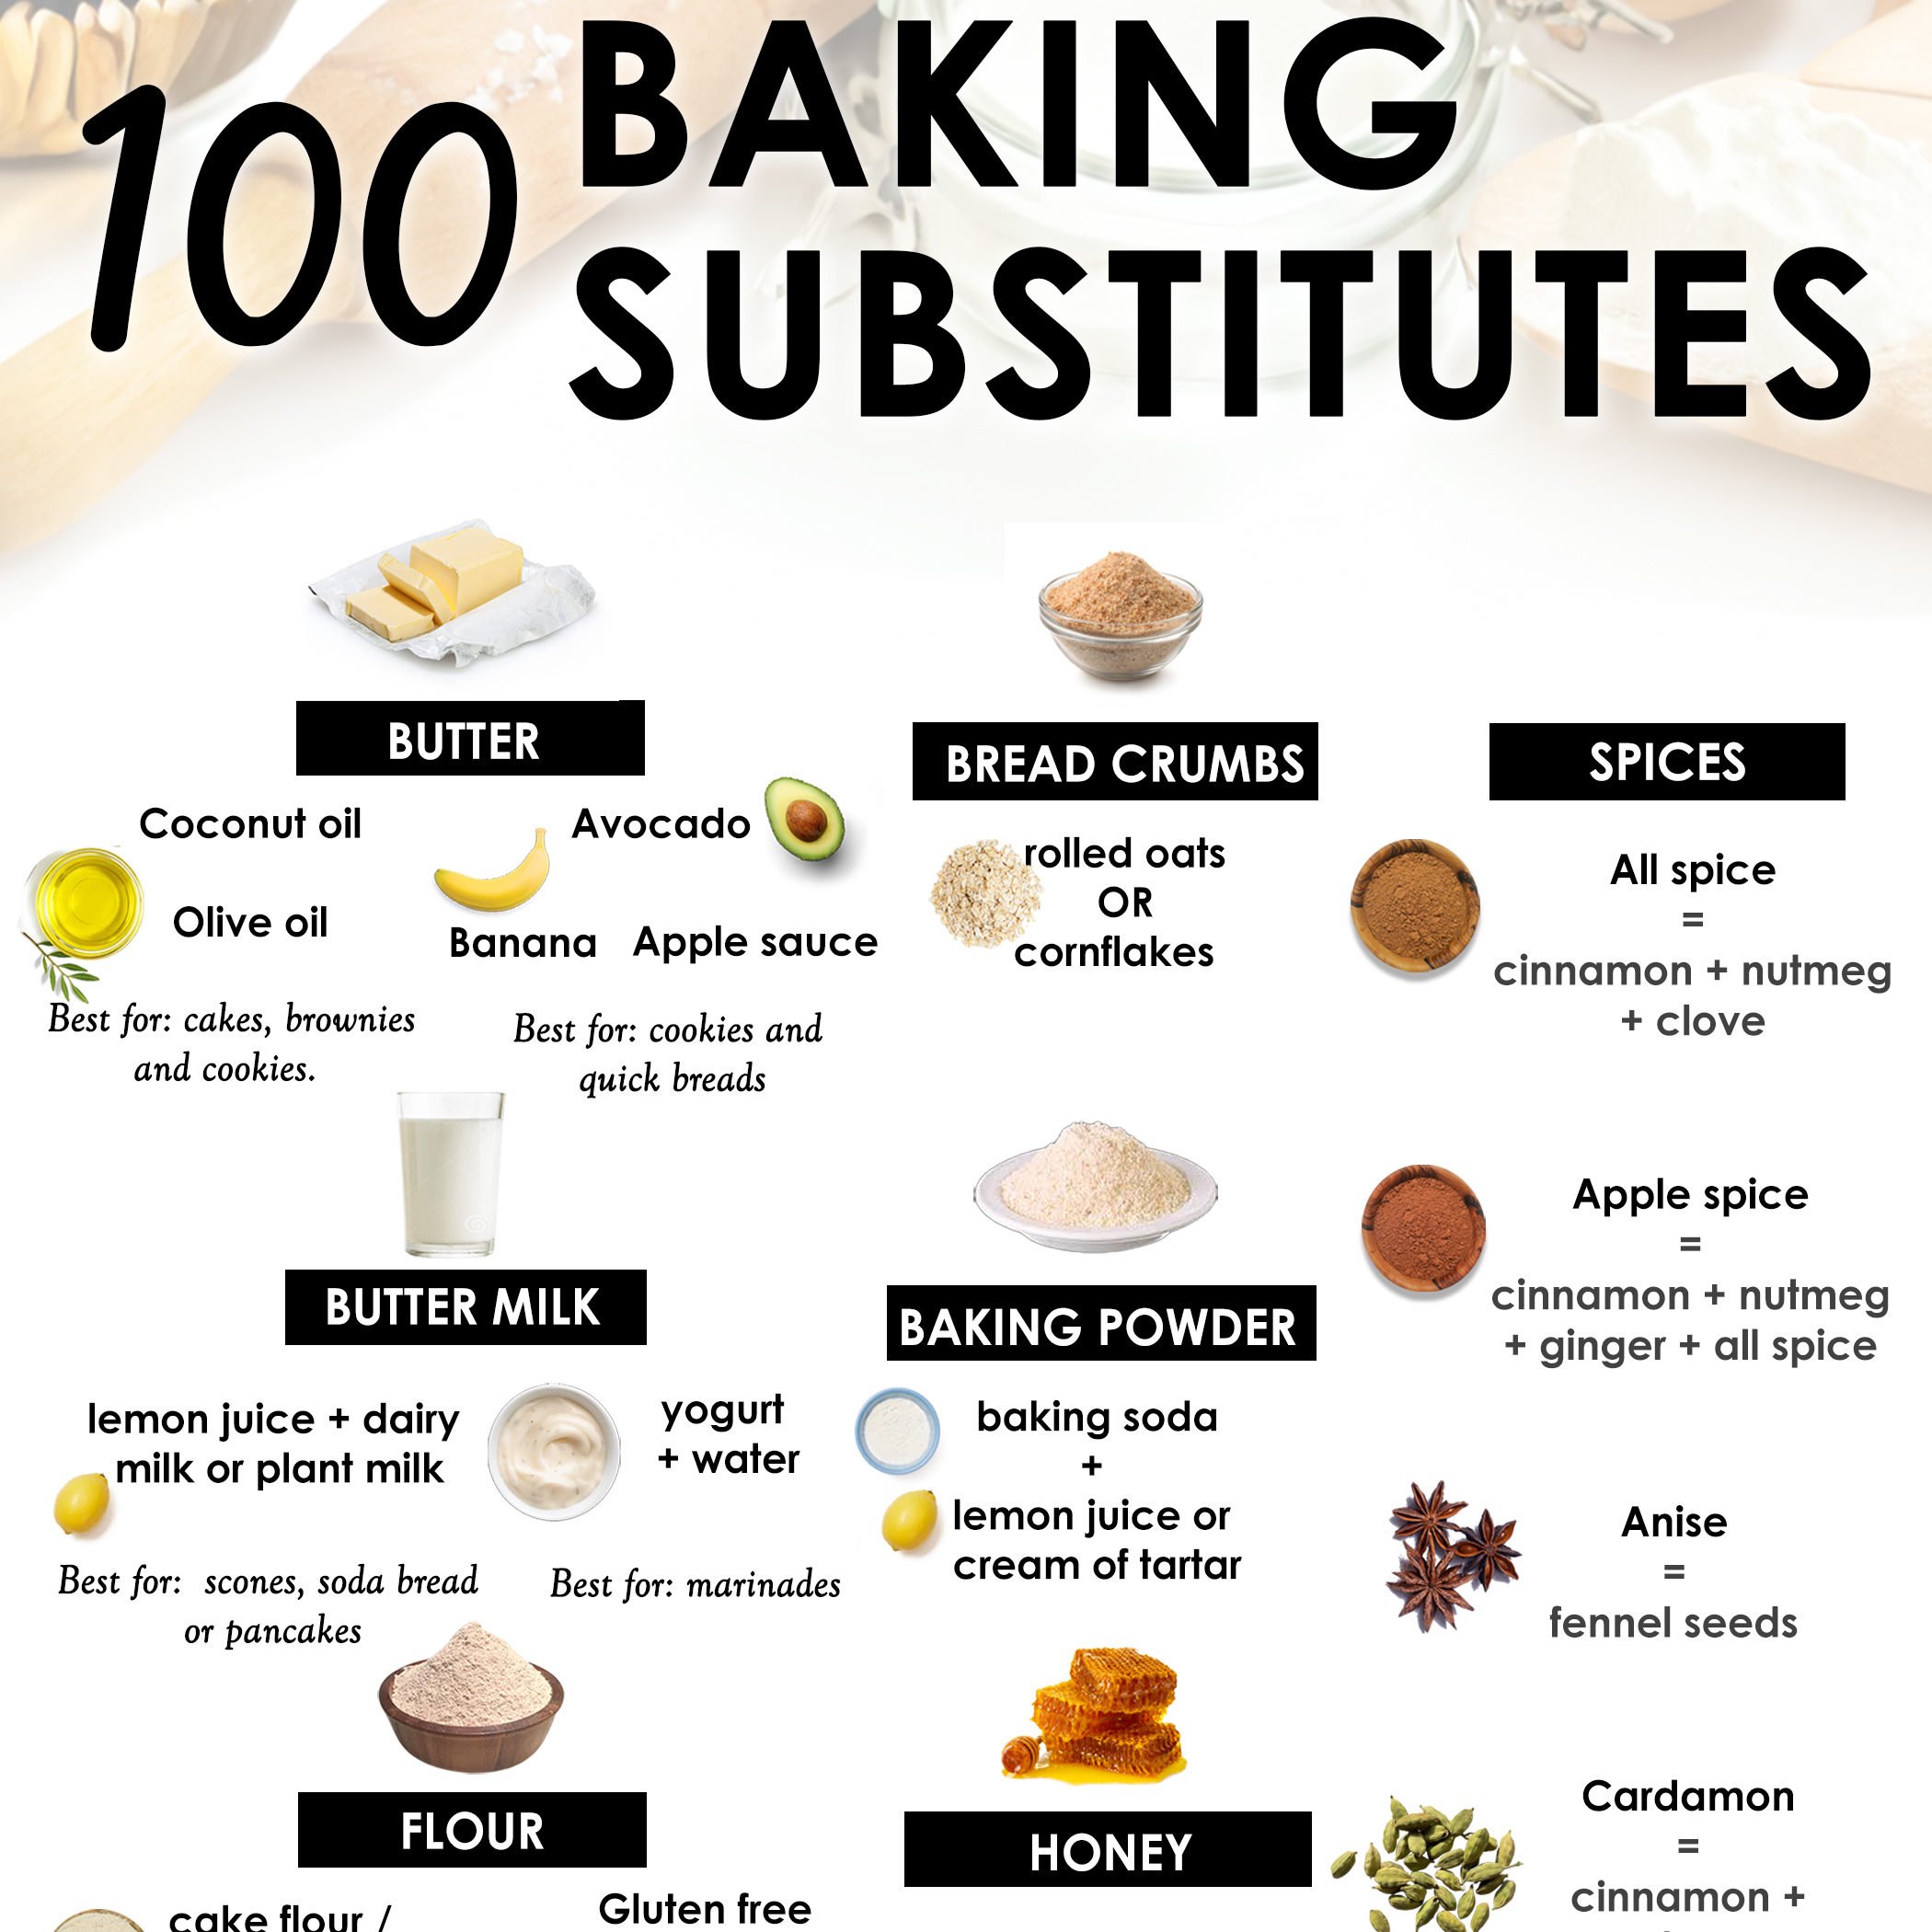 100 baking substitutes that covers every spice, liquid, flours and more